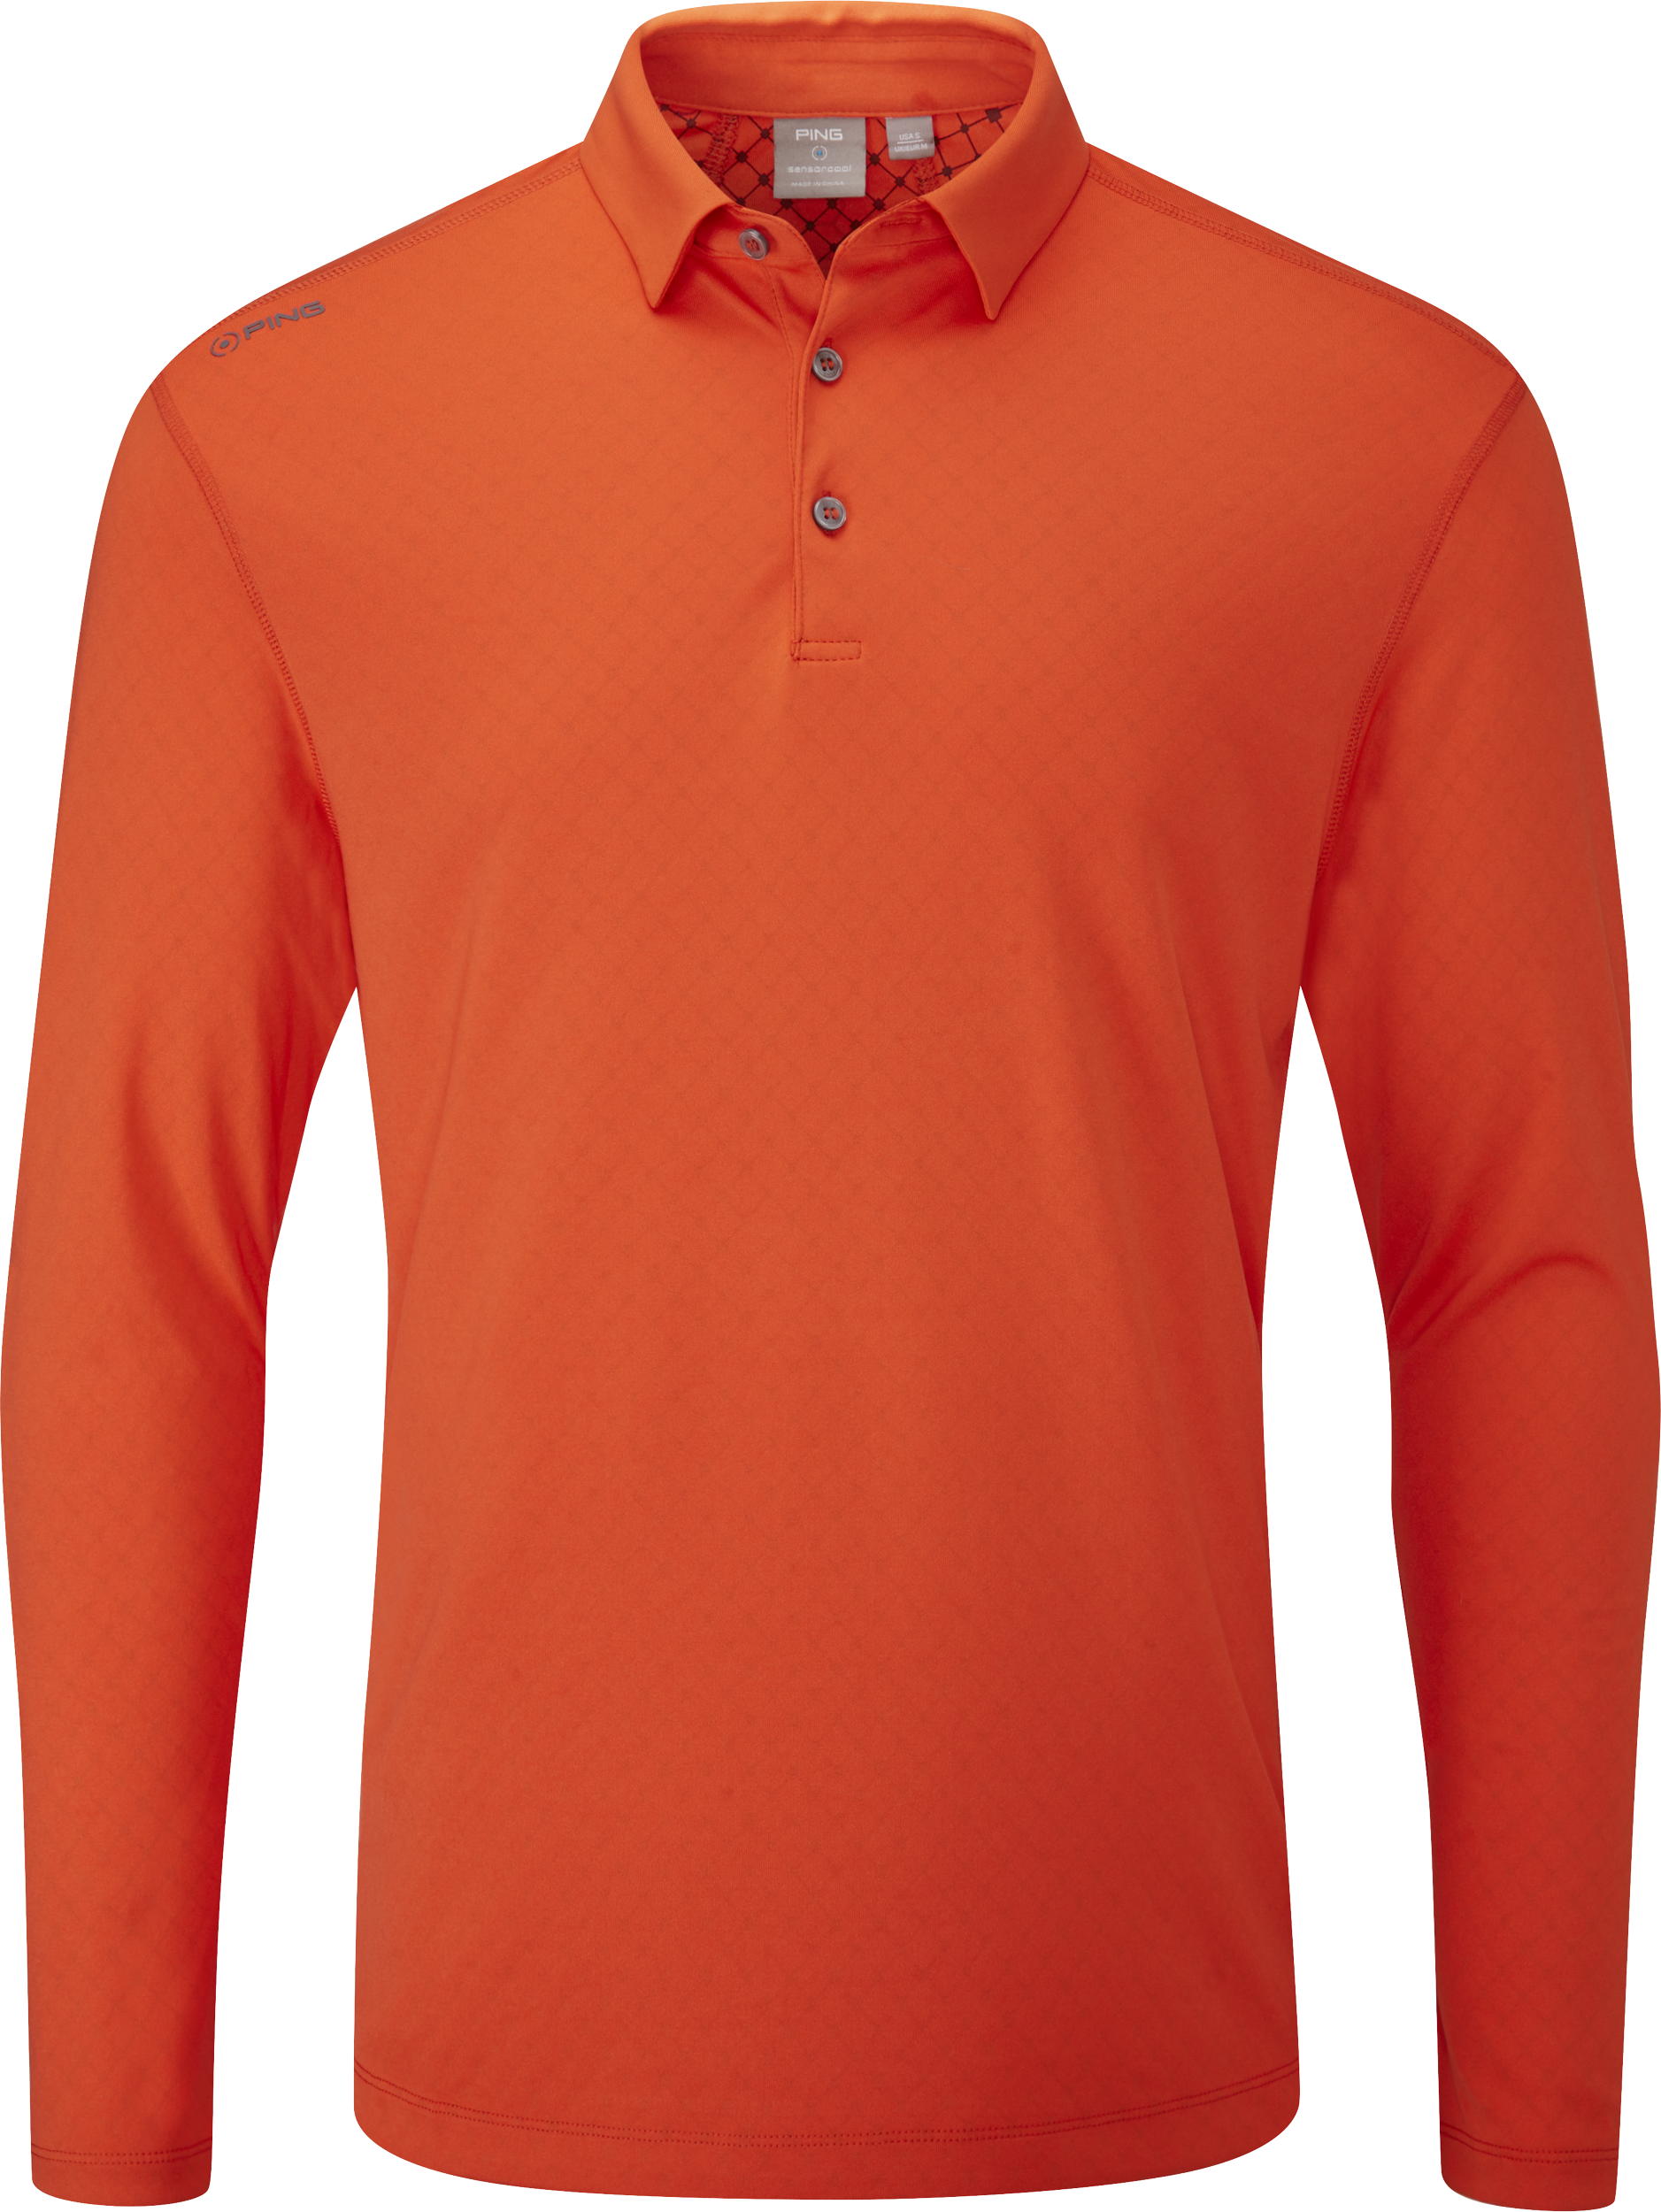 Ping Elemental LS Polo, flame